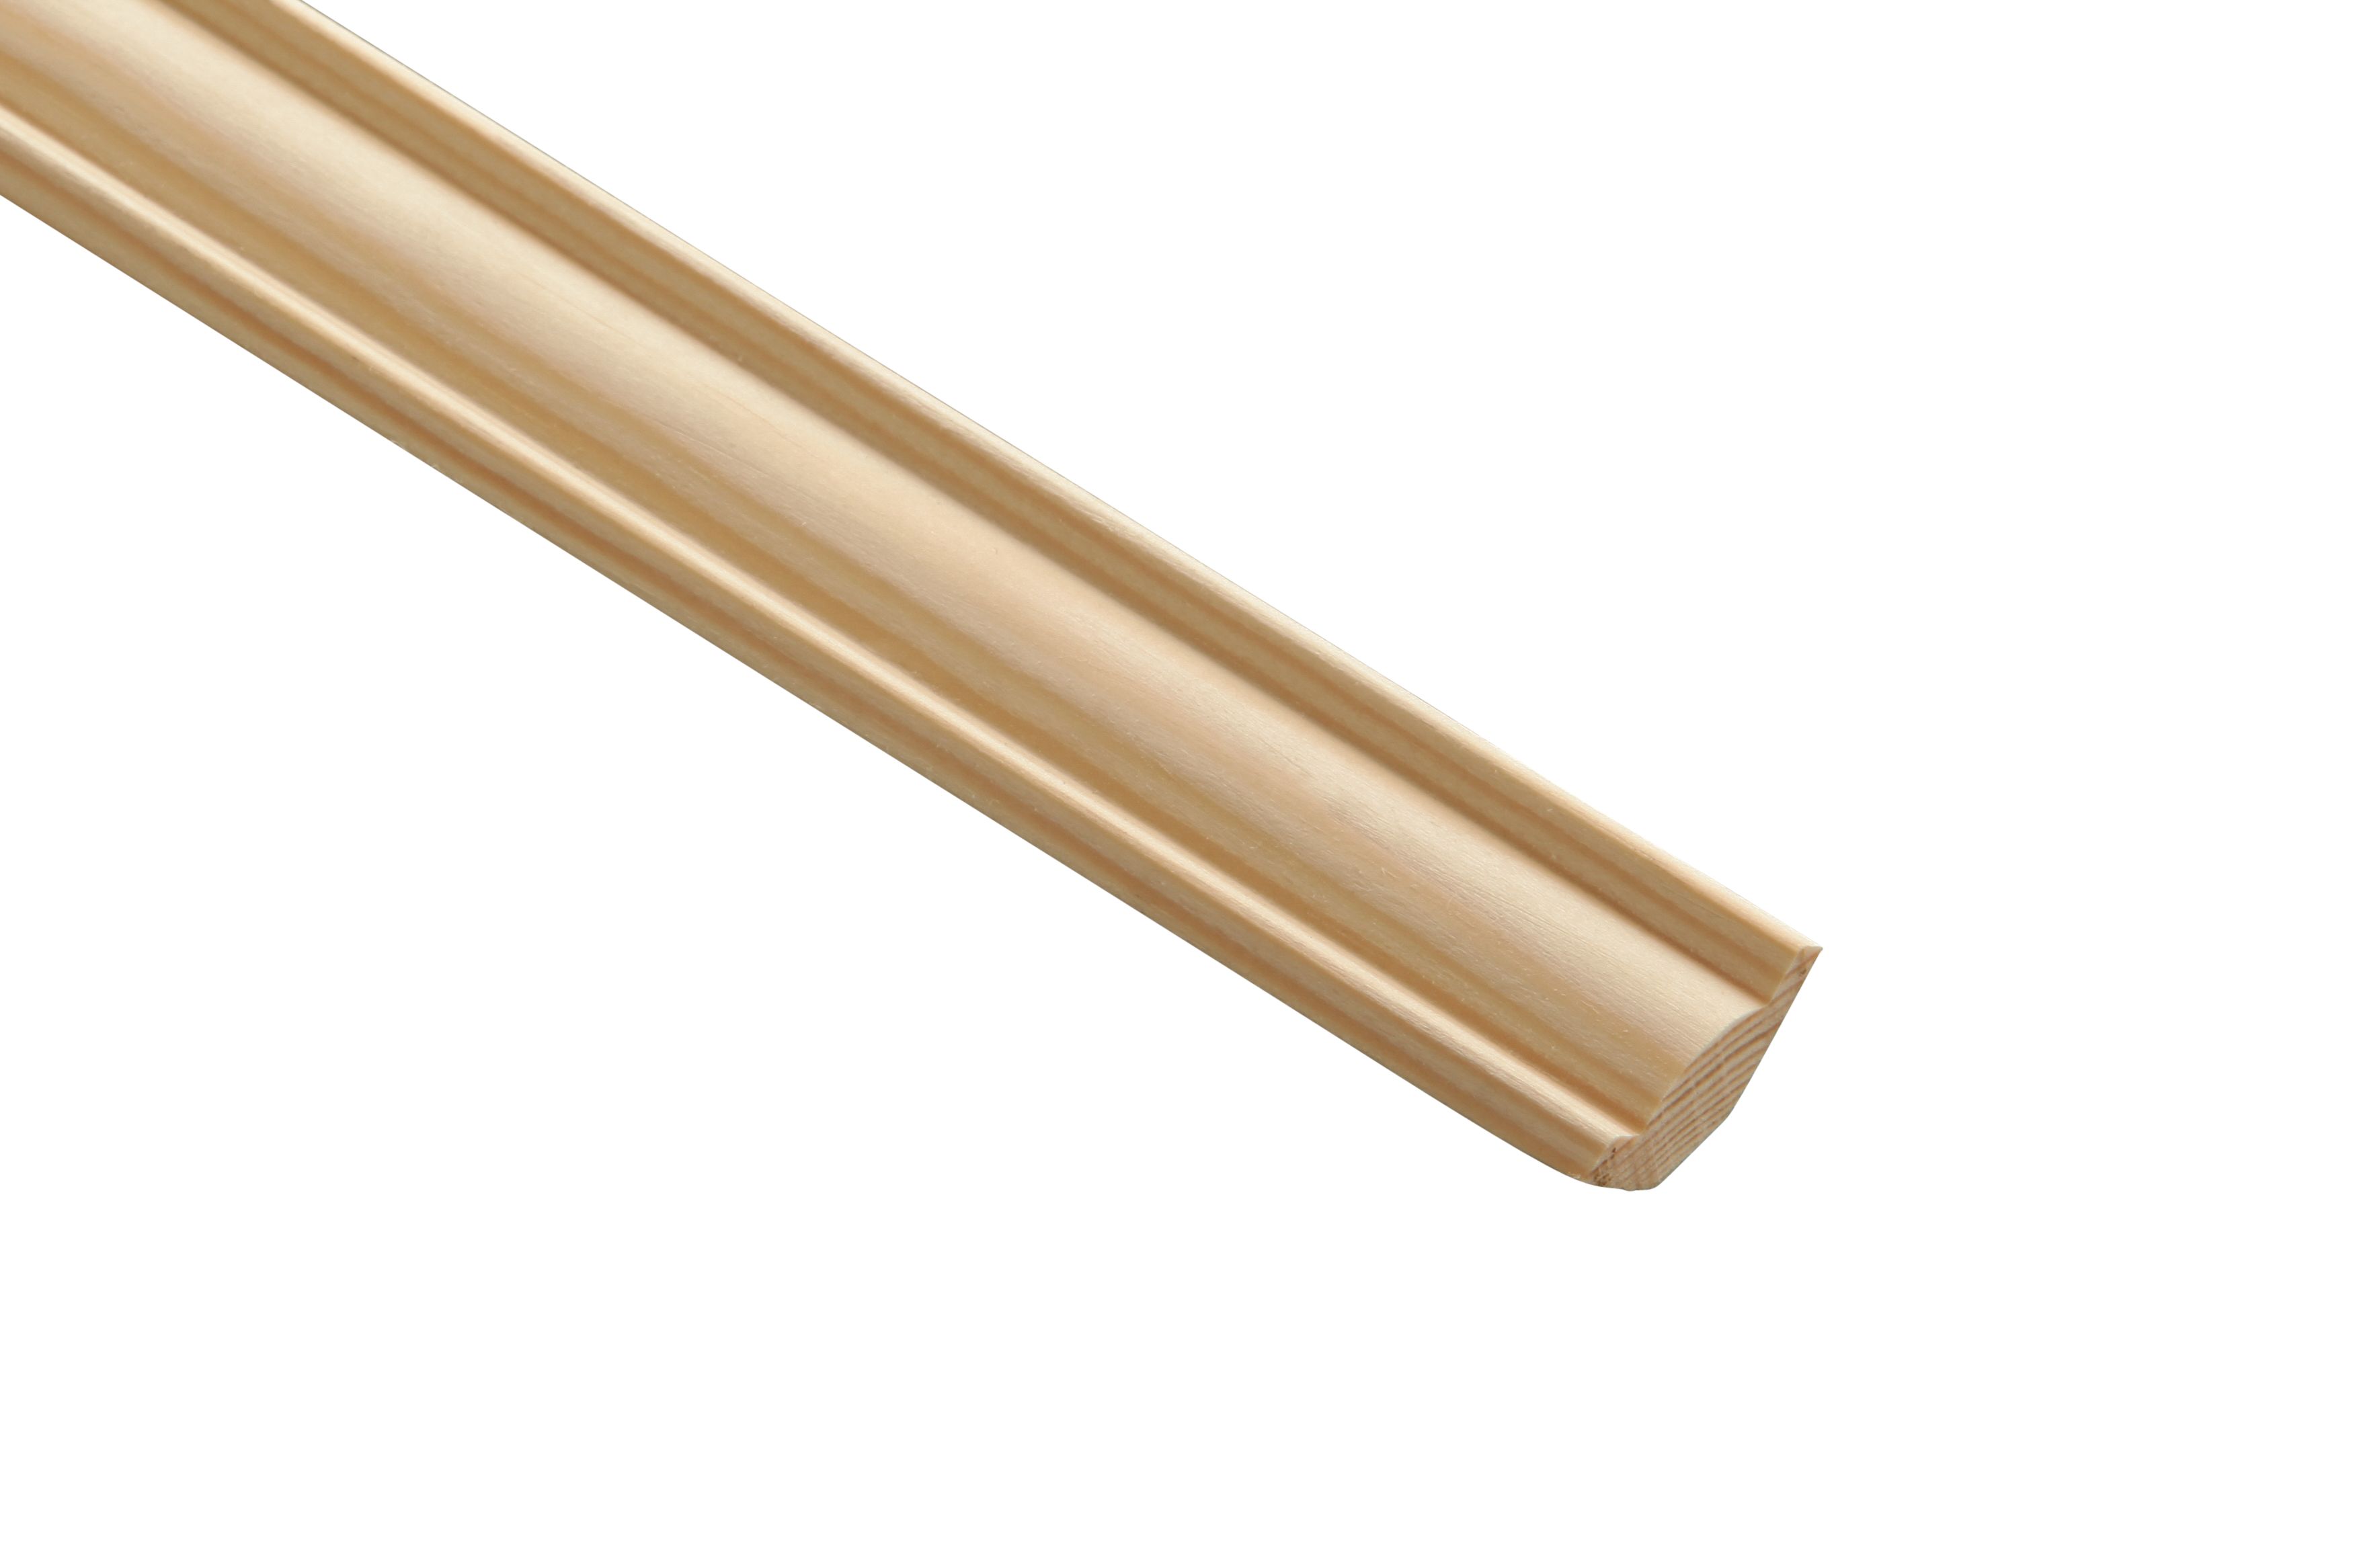 Image of Wickes Pine Coving Moulding - 20 x 20 x 2400mm